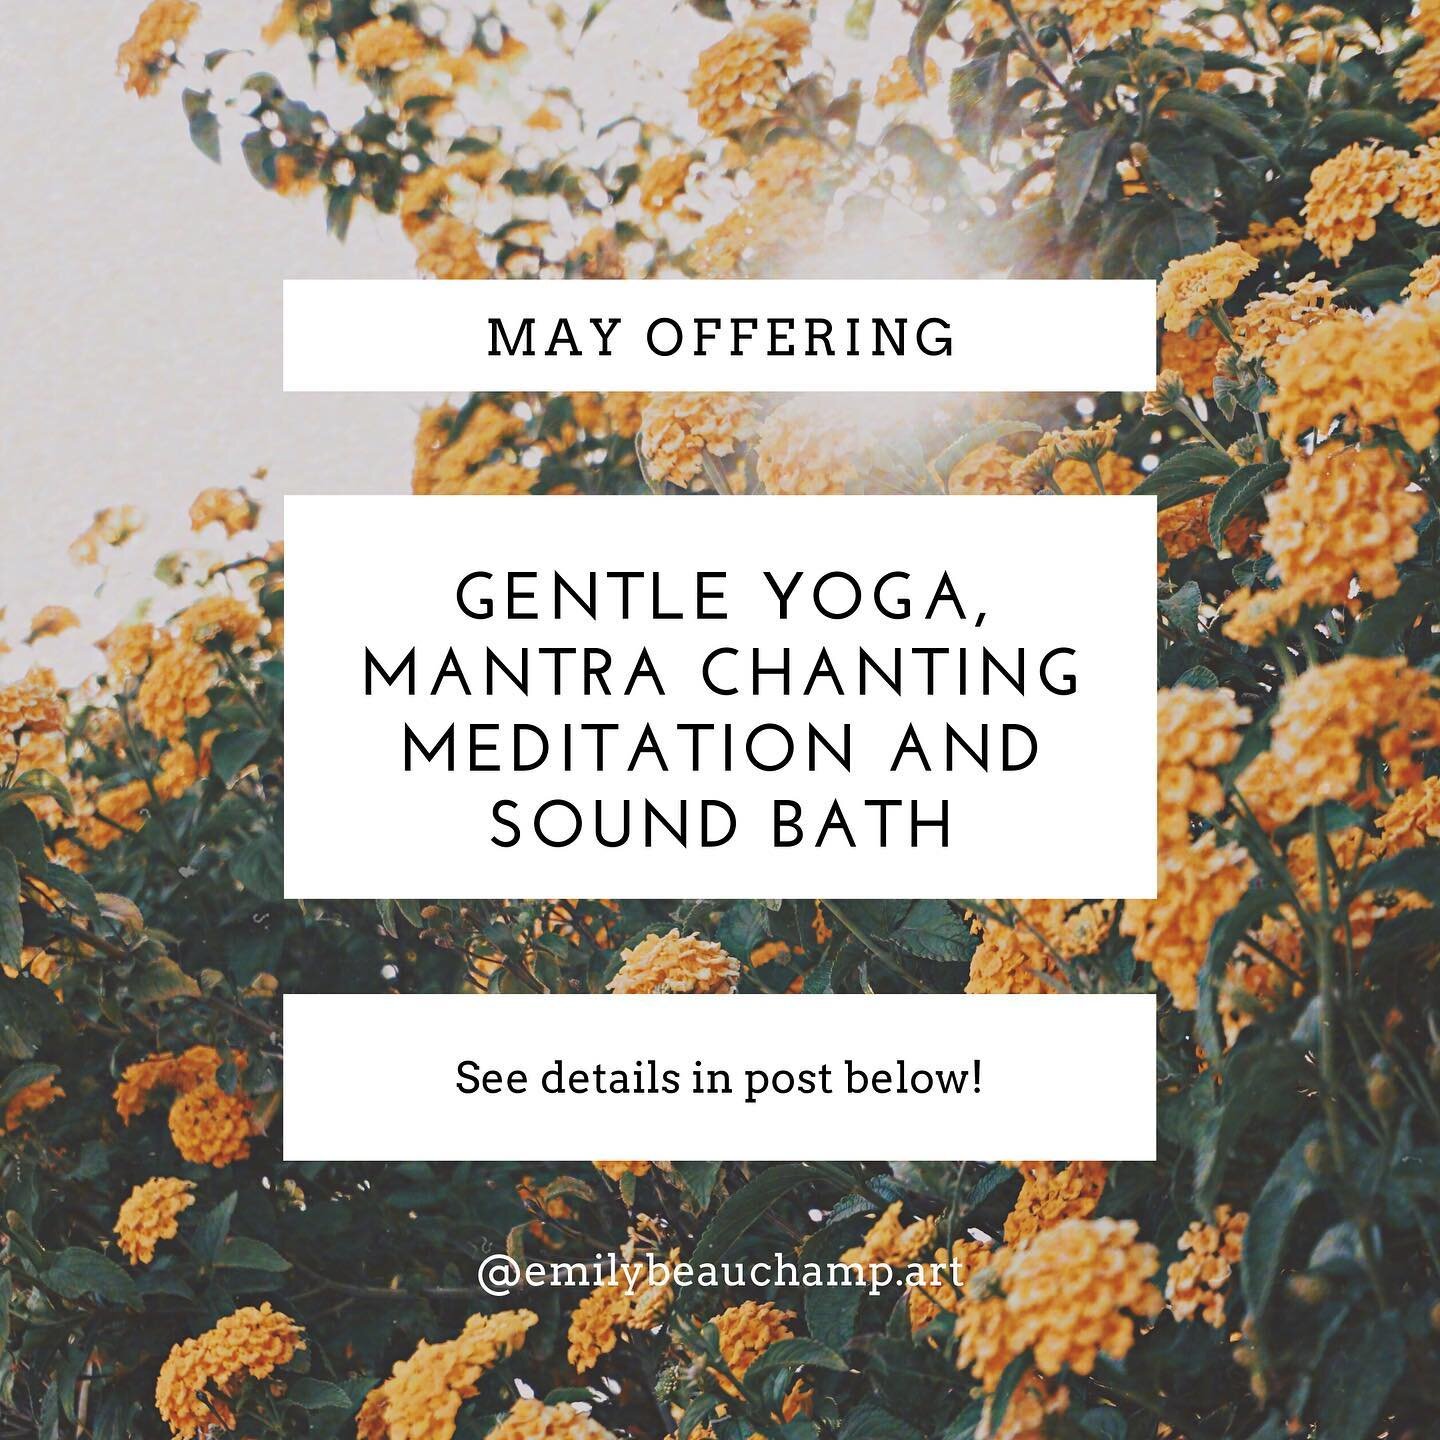 🌼Gentle Yoga, Mantra Chanting Meditation and Sound Bath: Sunday, May 23rd
⠀⠀⠀⠀⠀⠀⠀⠀⠀
My dear sister and yoga teacher Lauren Amrita Silverstein @laurenasilverstein and I will be offering a beautiful workshop, see details below! ✨
⠀⠀⠀⠀⠀⠀⠀⠀⠀
In this wor